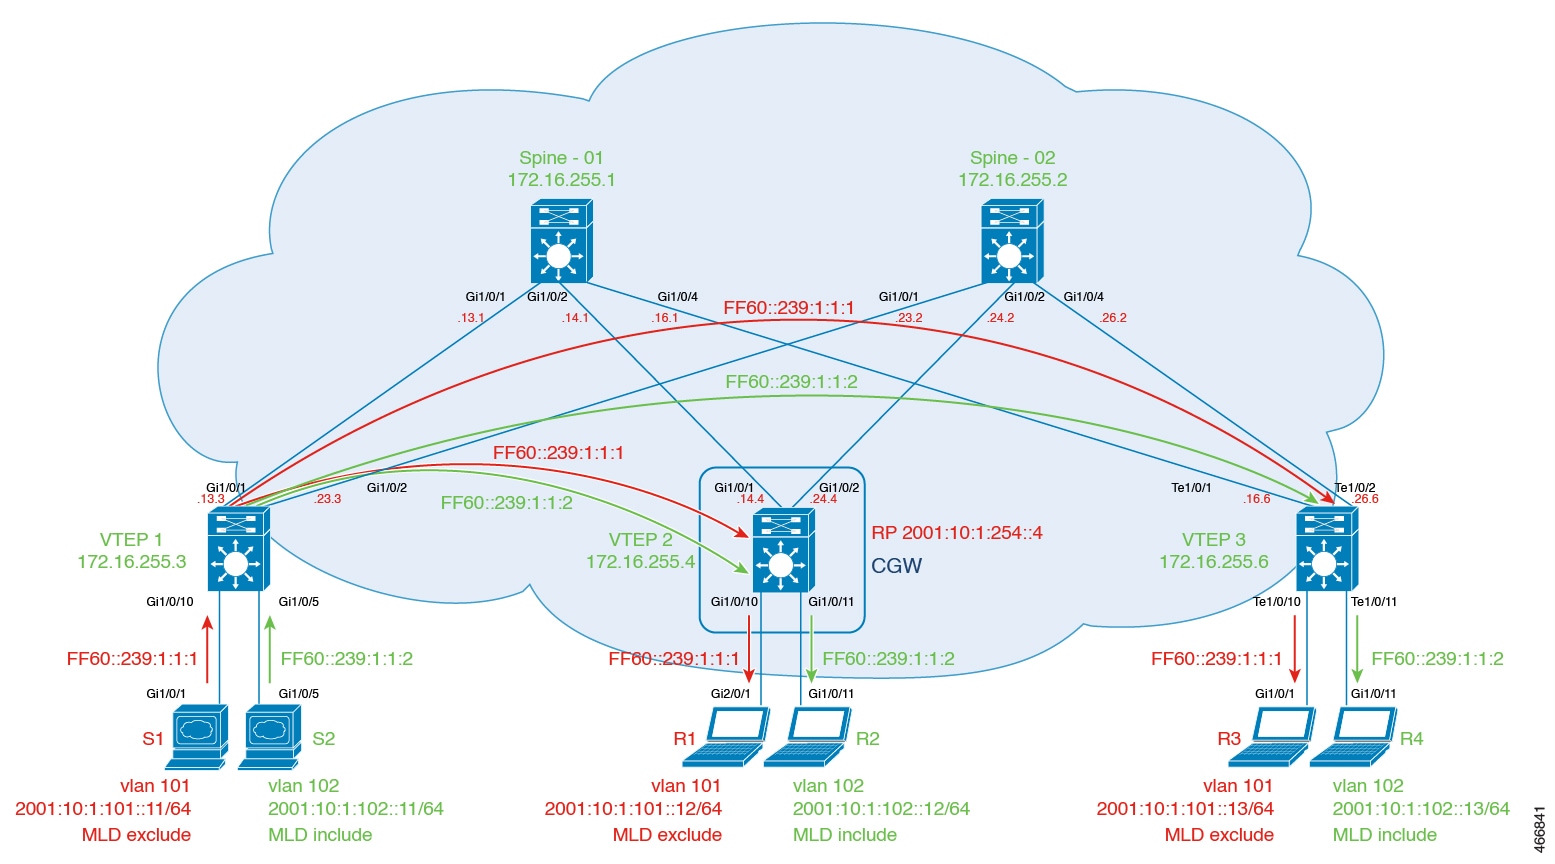 BGP EVPN VXLAN fabric topology for Optimized Layer 2 Multicast for IPv6 traffic with ingress replication in the underlay network